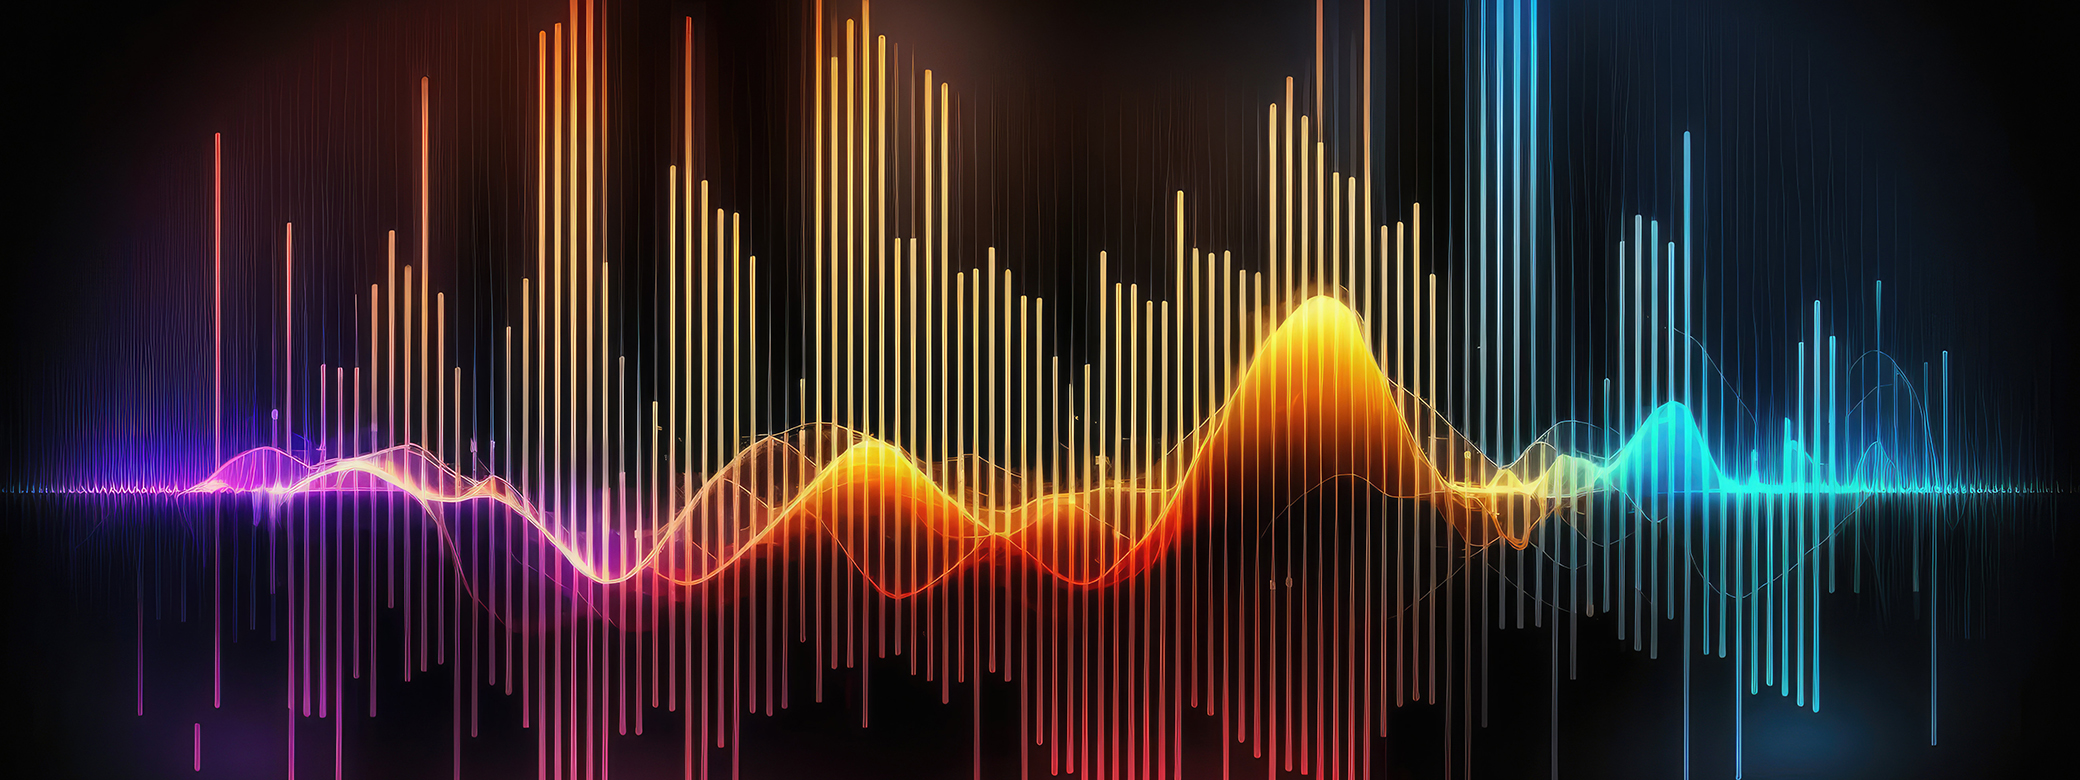 depiction of sound waves in colorful pinks, golds, and blues